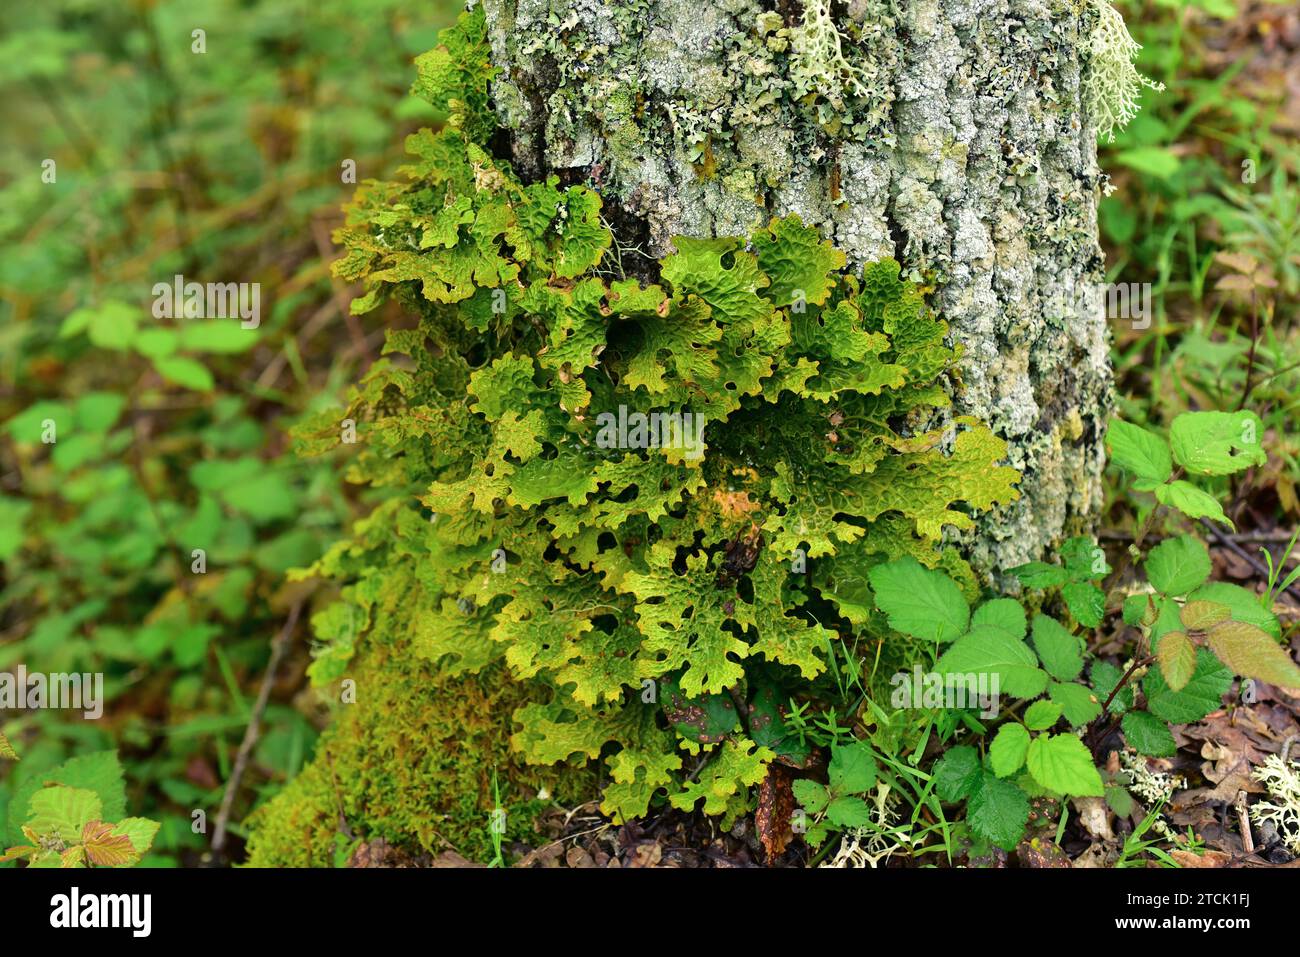 Lung lichen (Lobaria pulmonaria) is a medicinal foliose lichen that grows on an oak bark tree. This photo was taken in Muniellos Biosphere Reserve, As Stock Photo